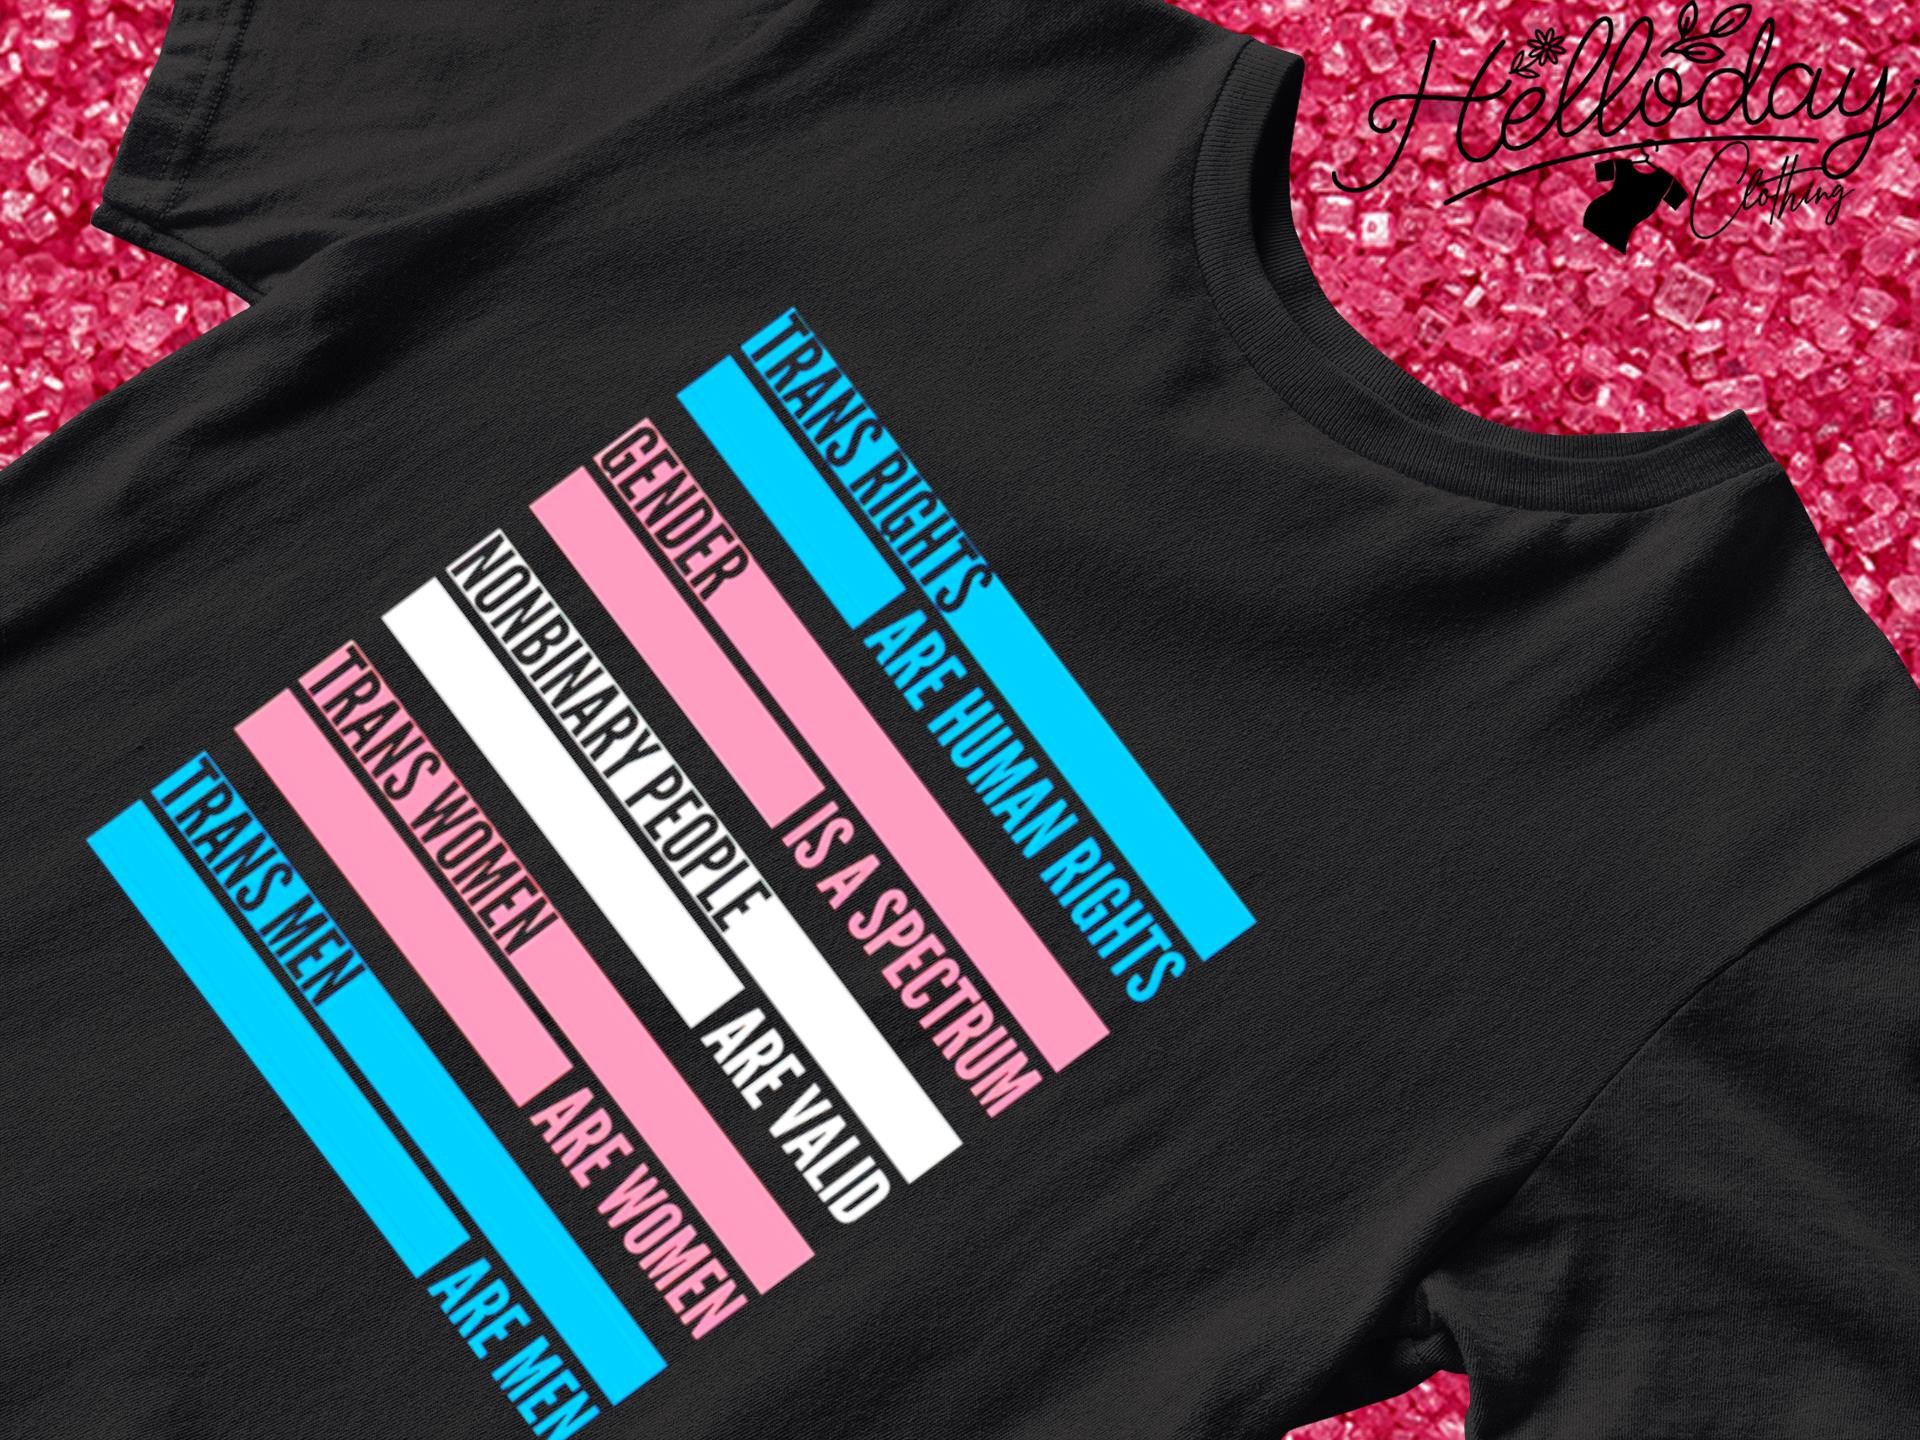 Trans right are human right gender is a spectrum shirt